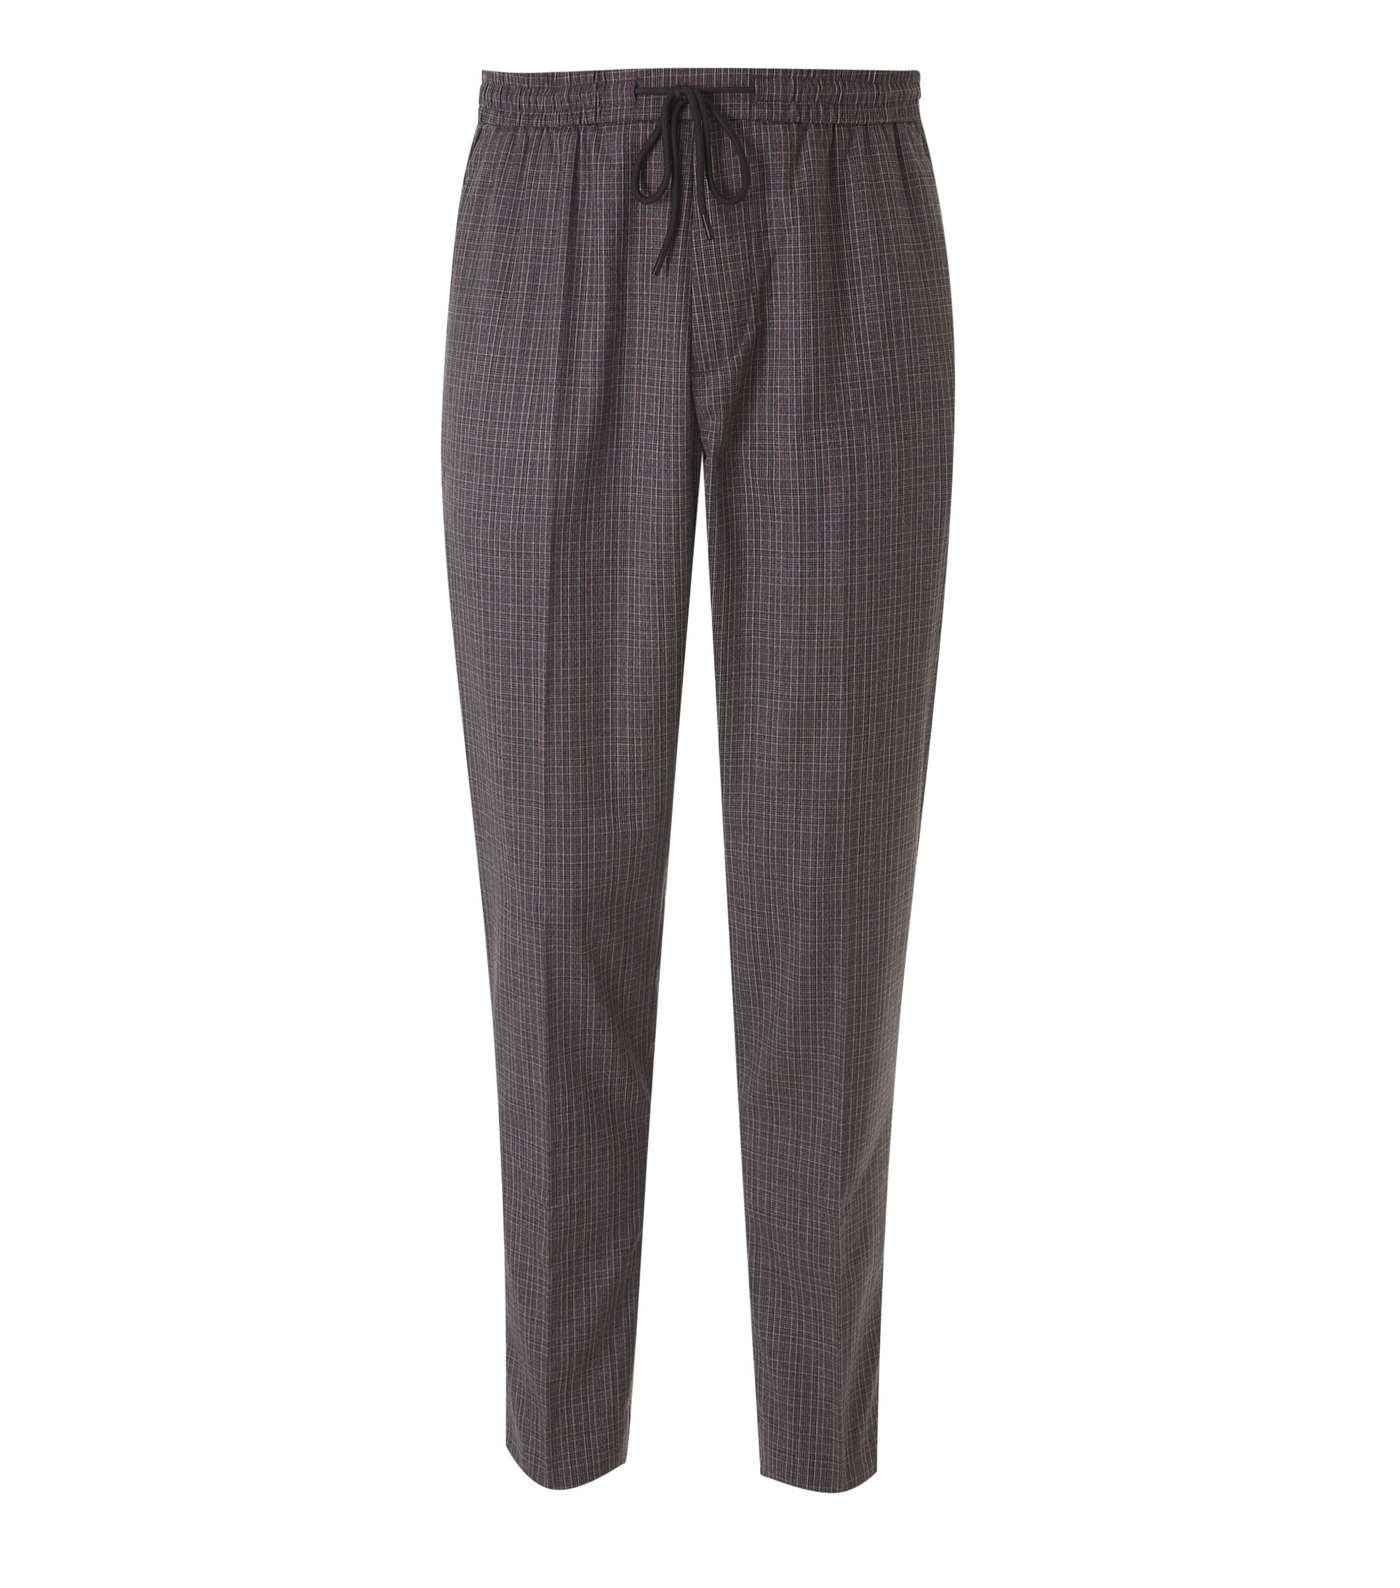 Plus Size Dark Grey Check Pull On Trousers